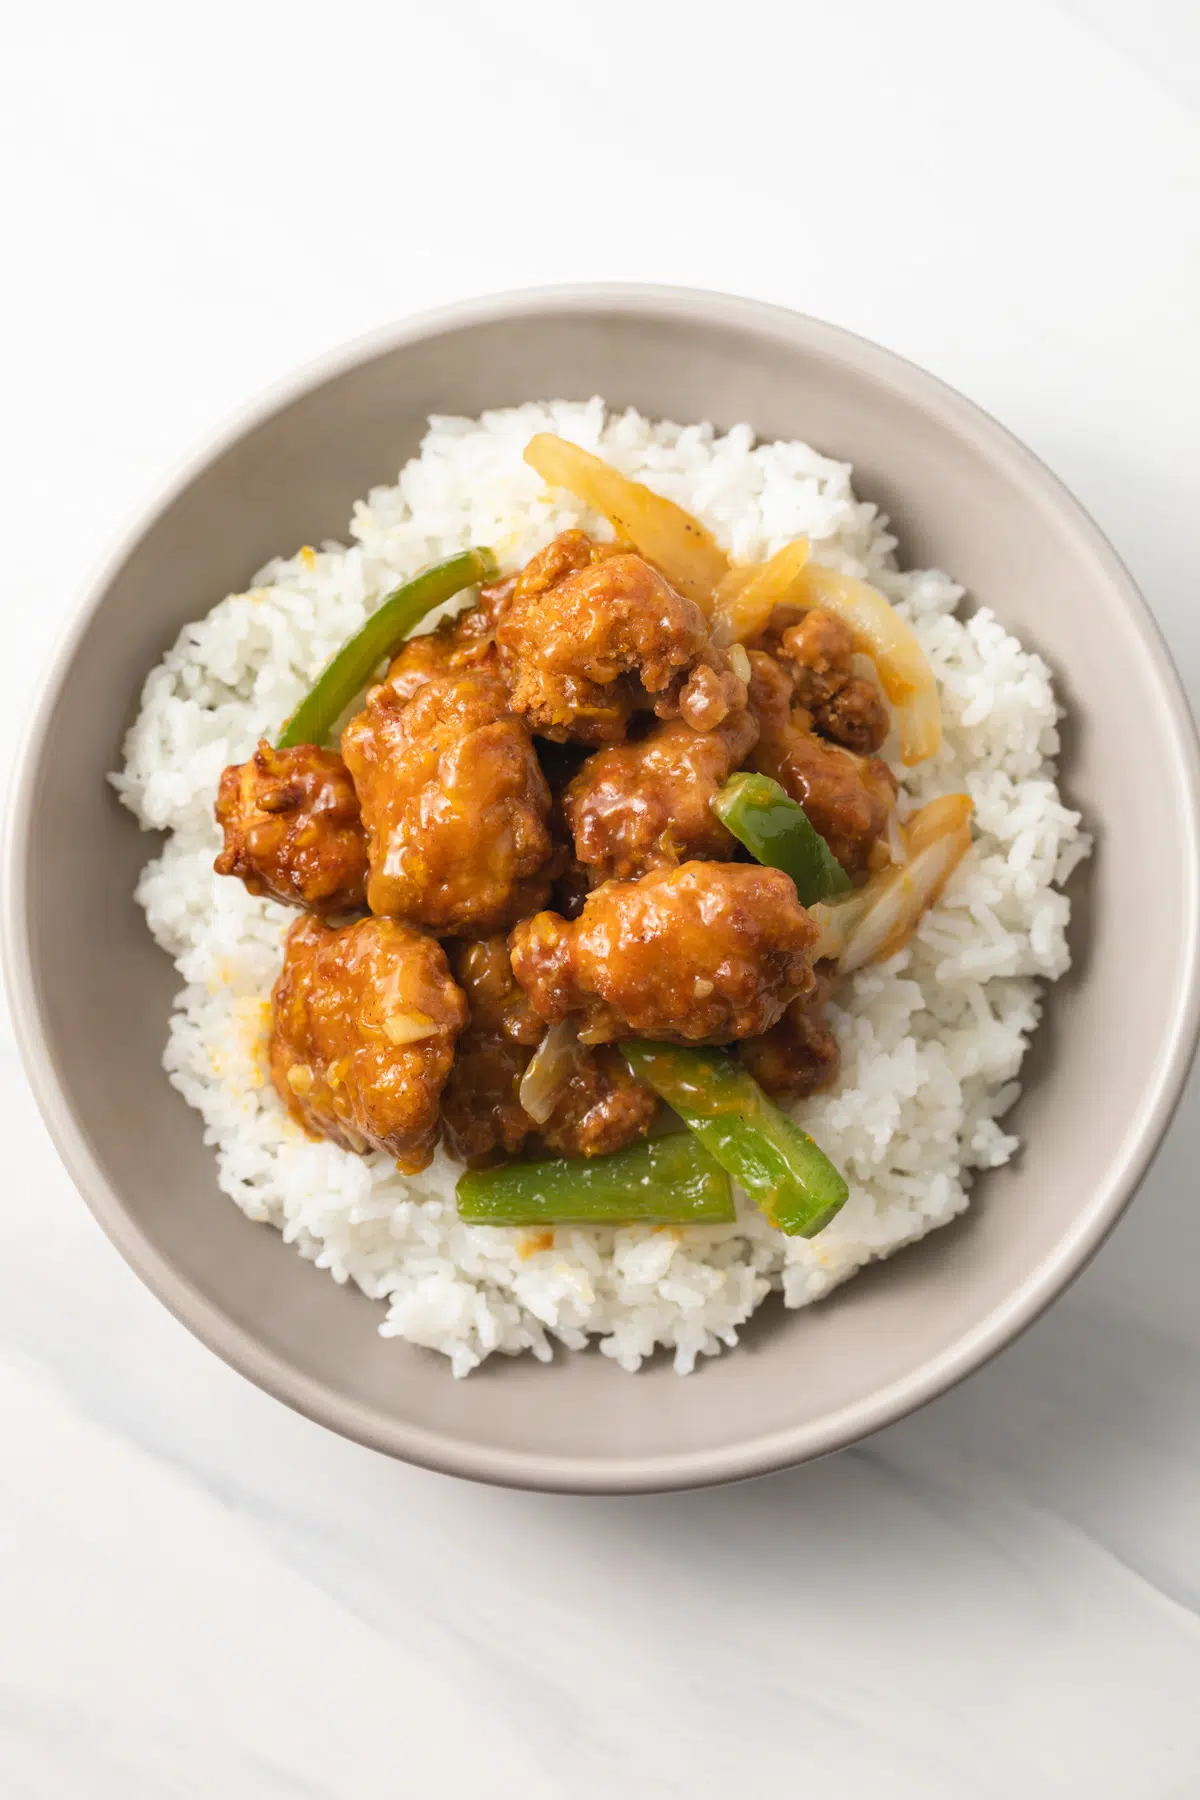 Chicken coated in orange ginger sauce over rice.